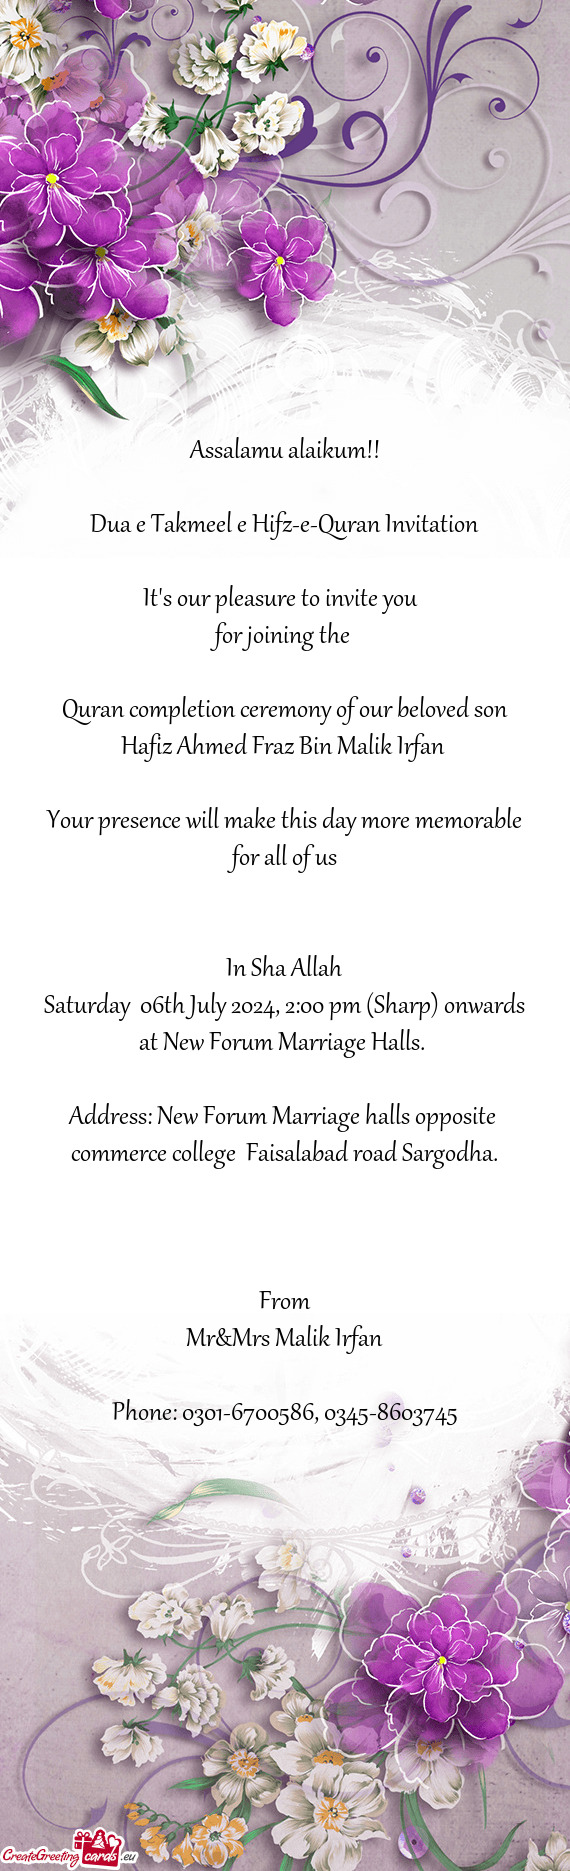 Saturday 06th July 2024, 2:00 pm (Sharp) onwards at New Forum Marriage Halls